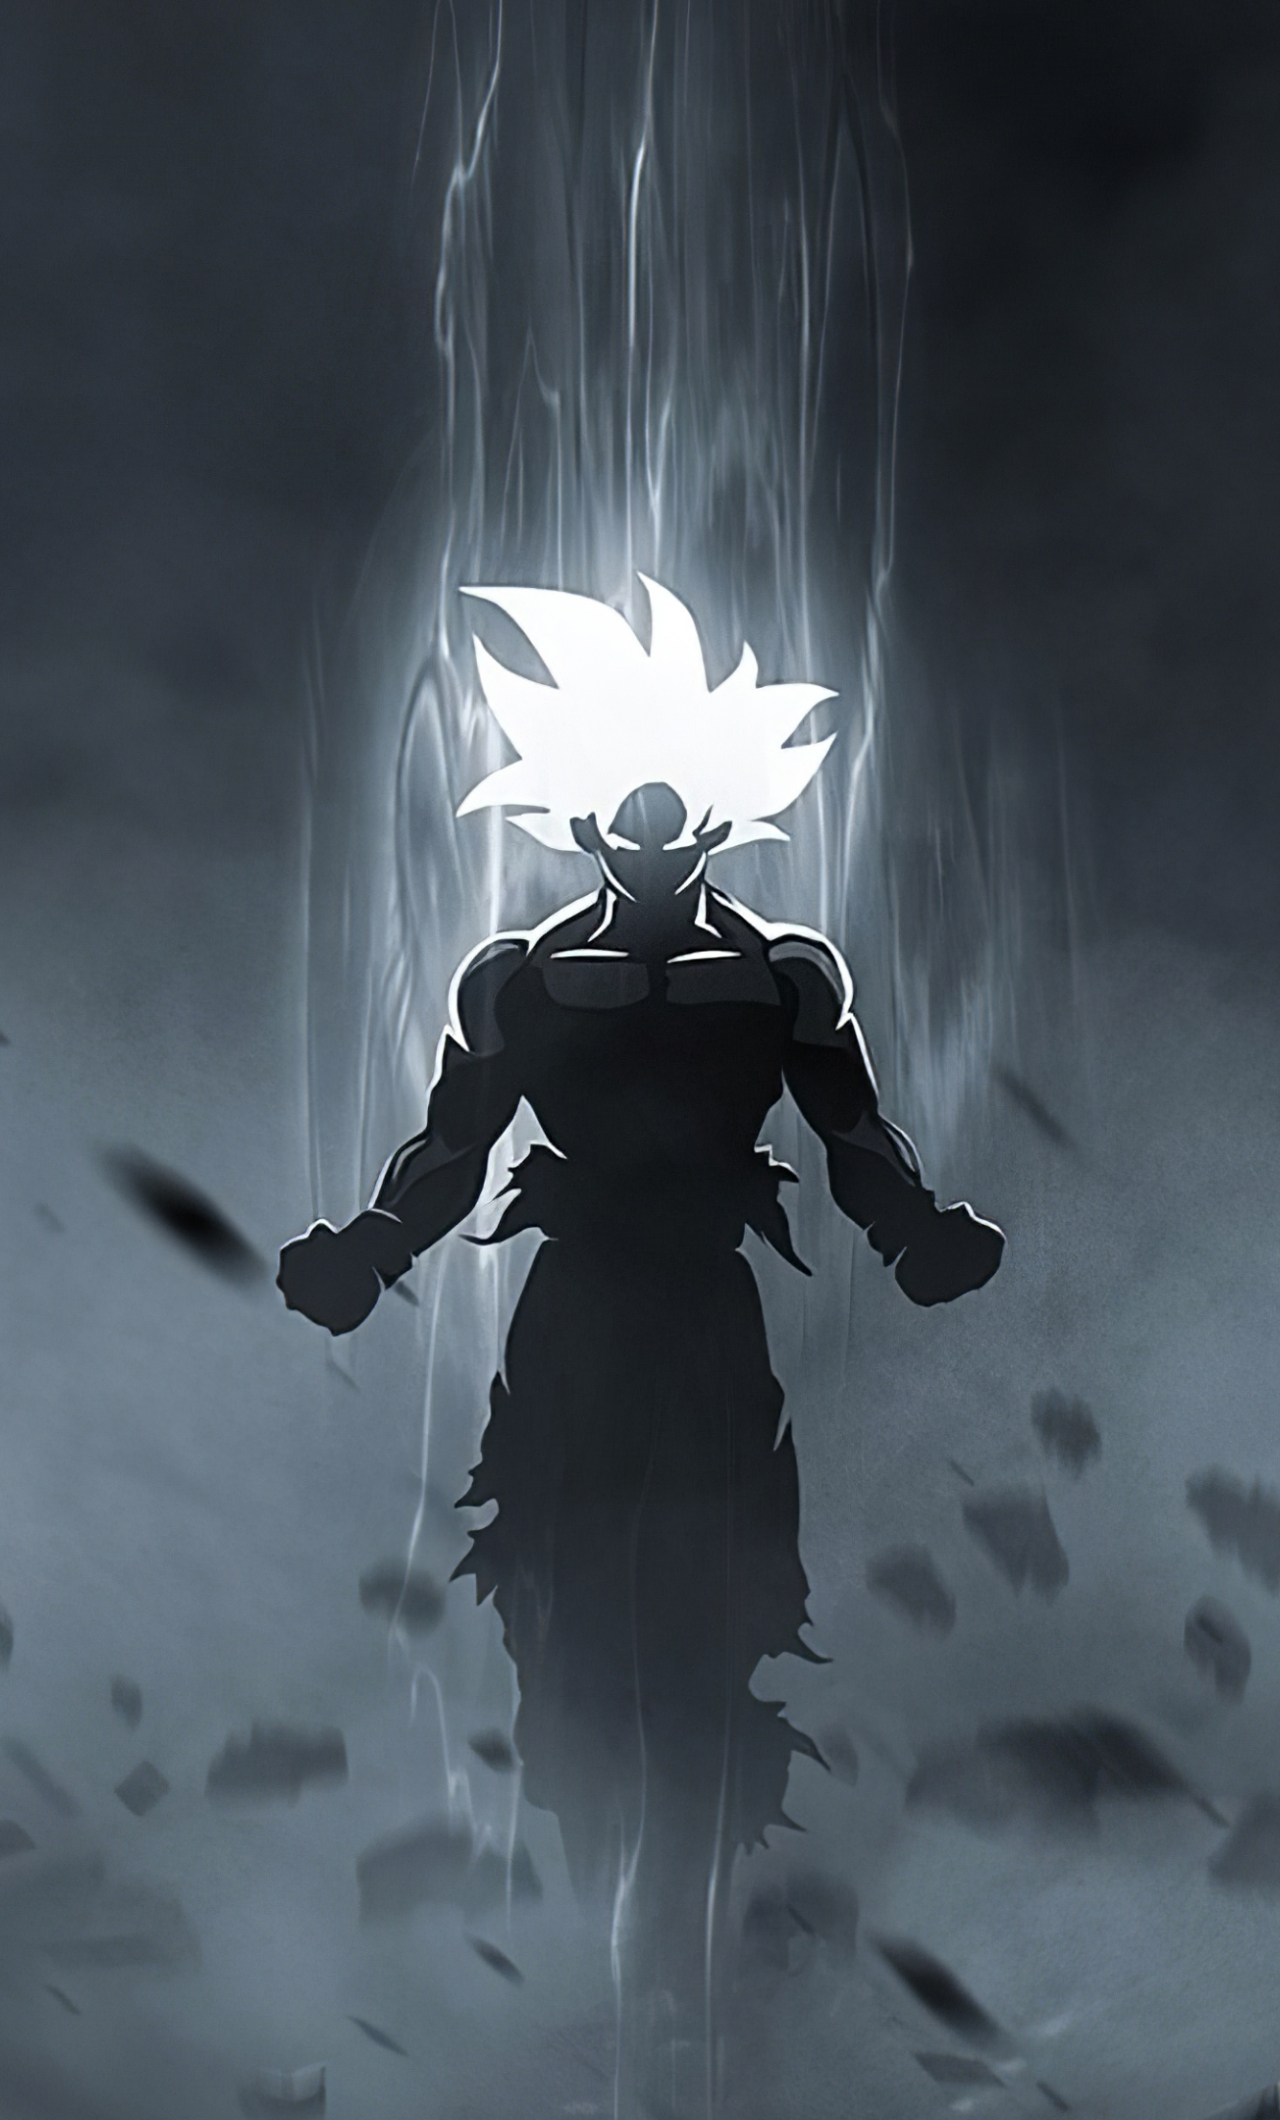 Download wallpaper 1280x2120 goku, anime art, glowing eyes and hair, iphone  6 plus, 1280x2120 hd background, 24511